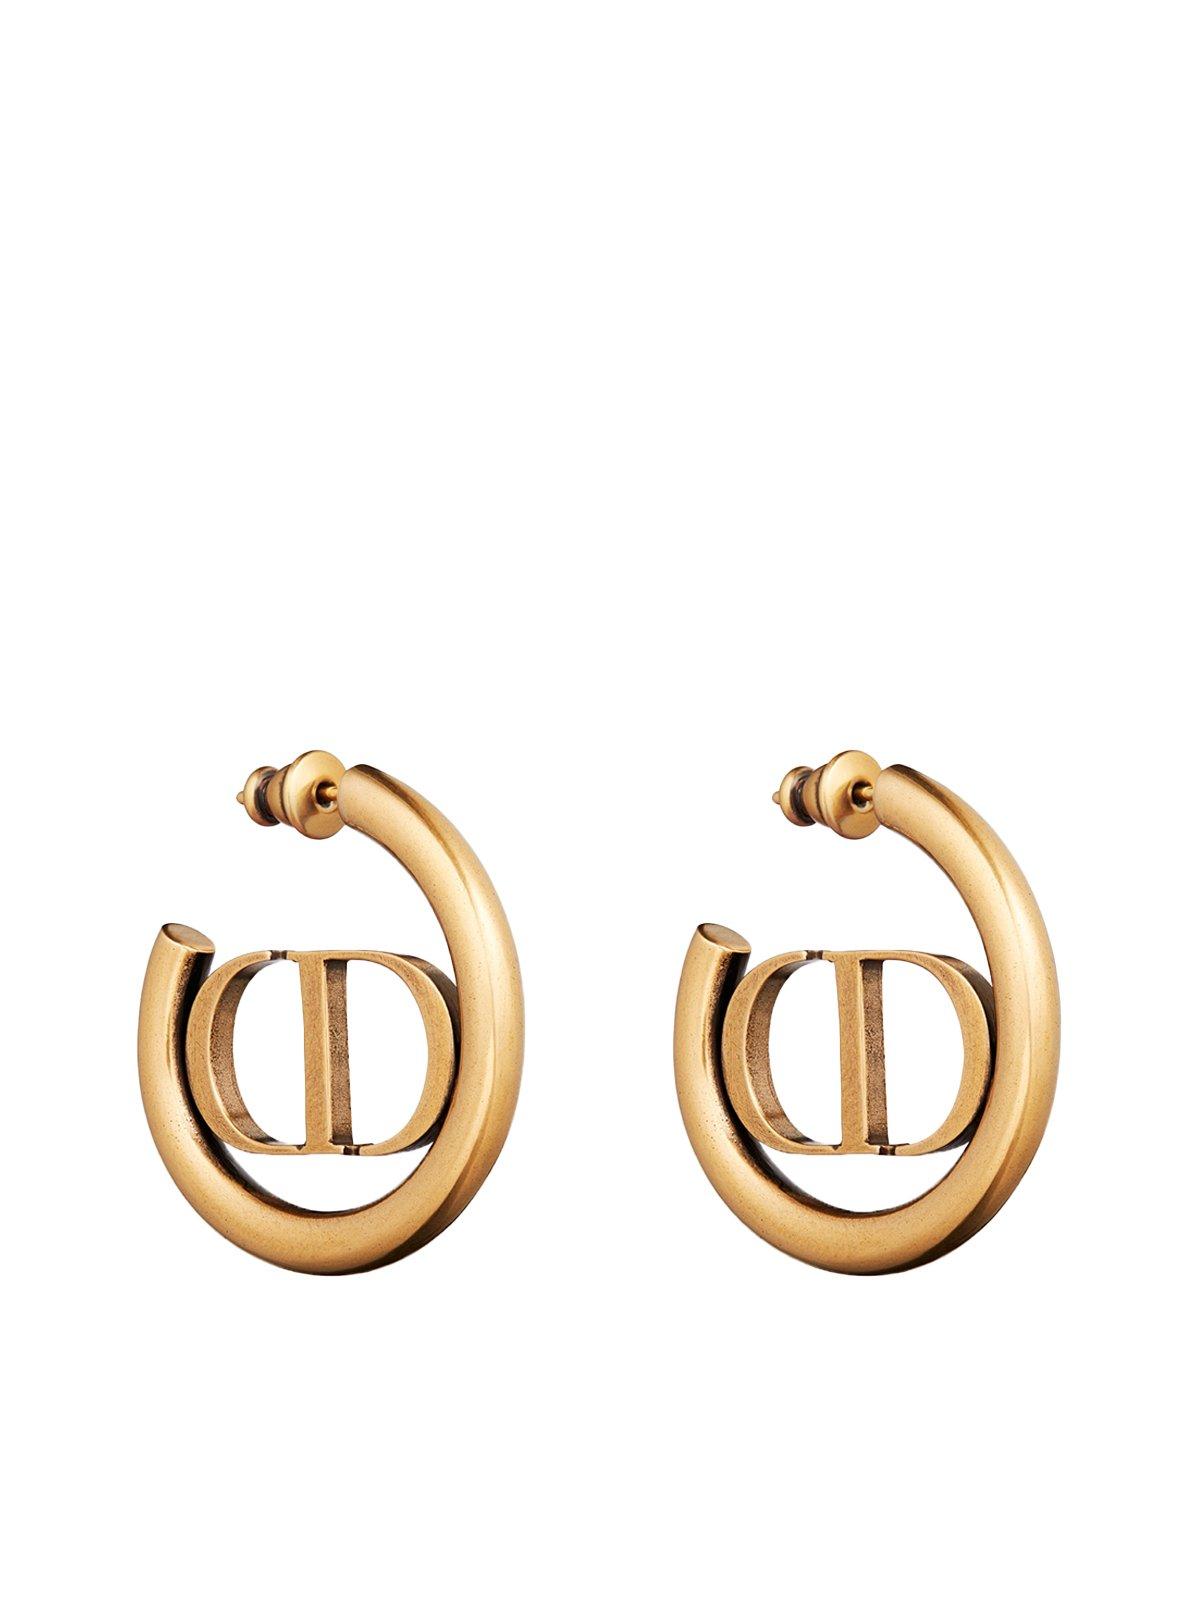 30 montaigne earrings Dior Gold in Gold plated  22059640